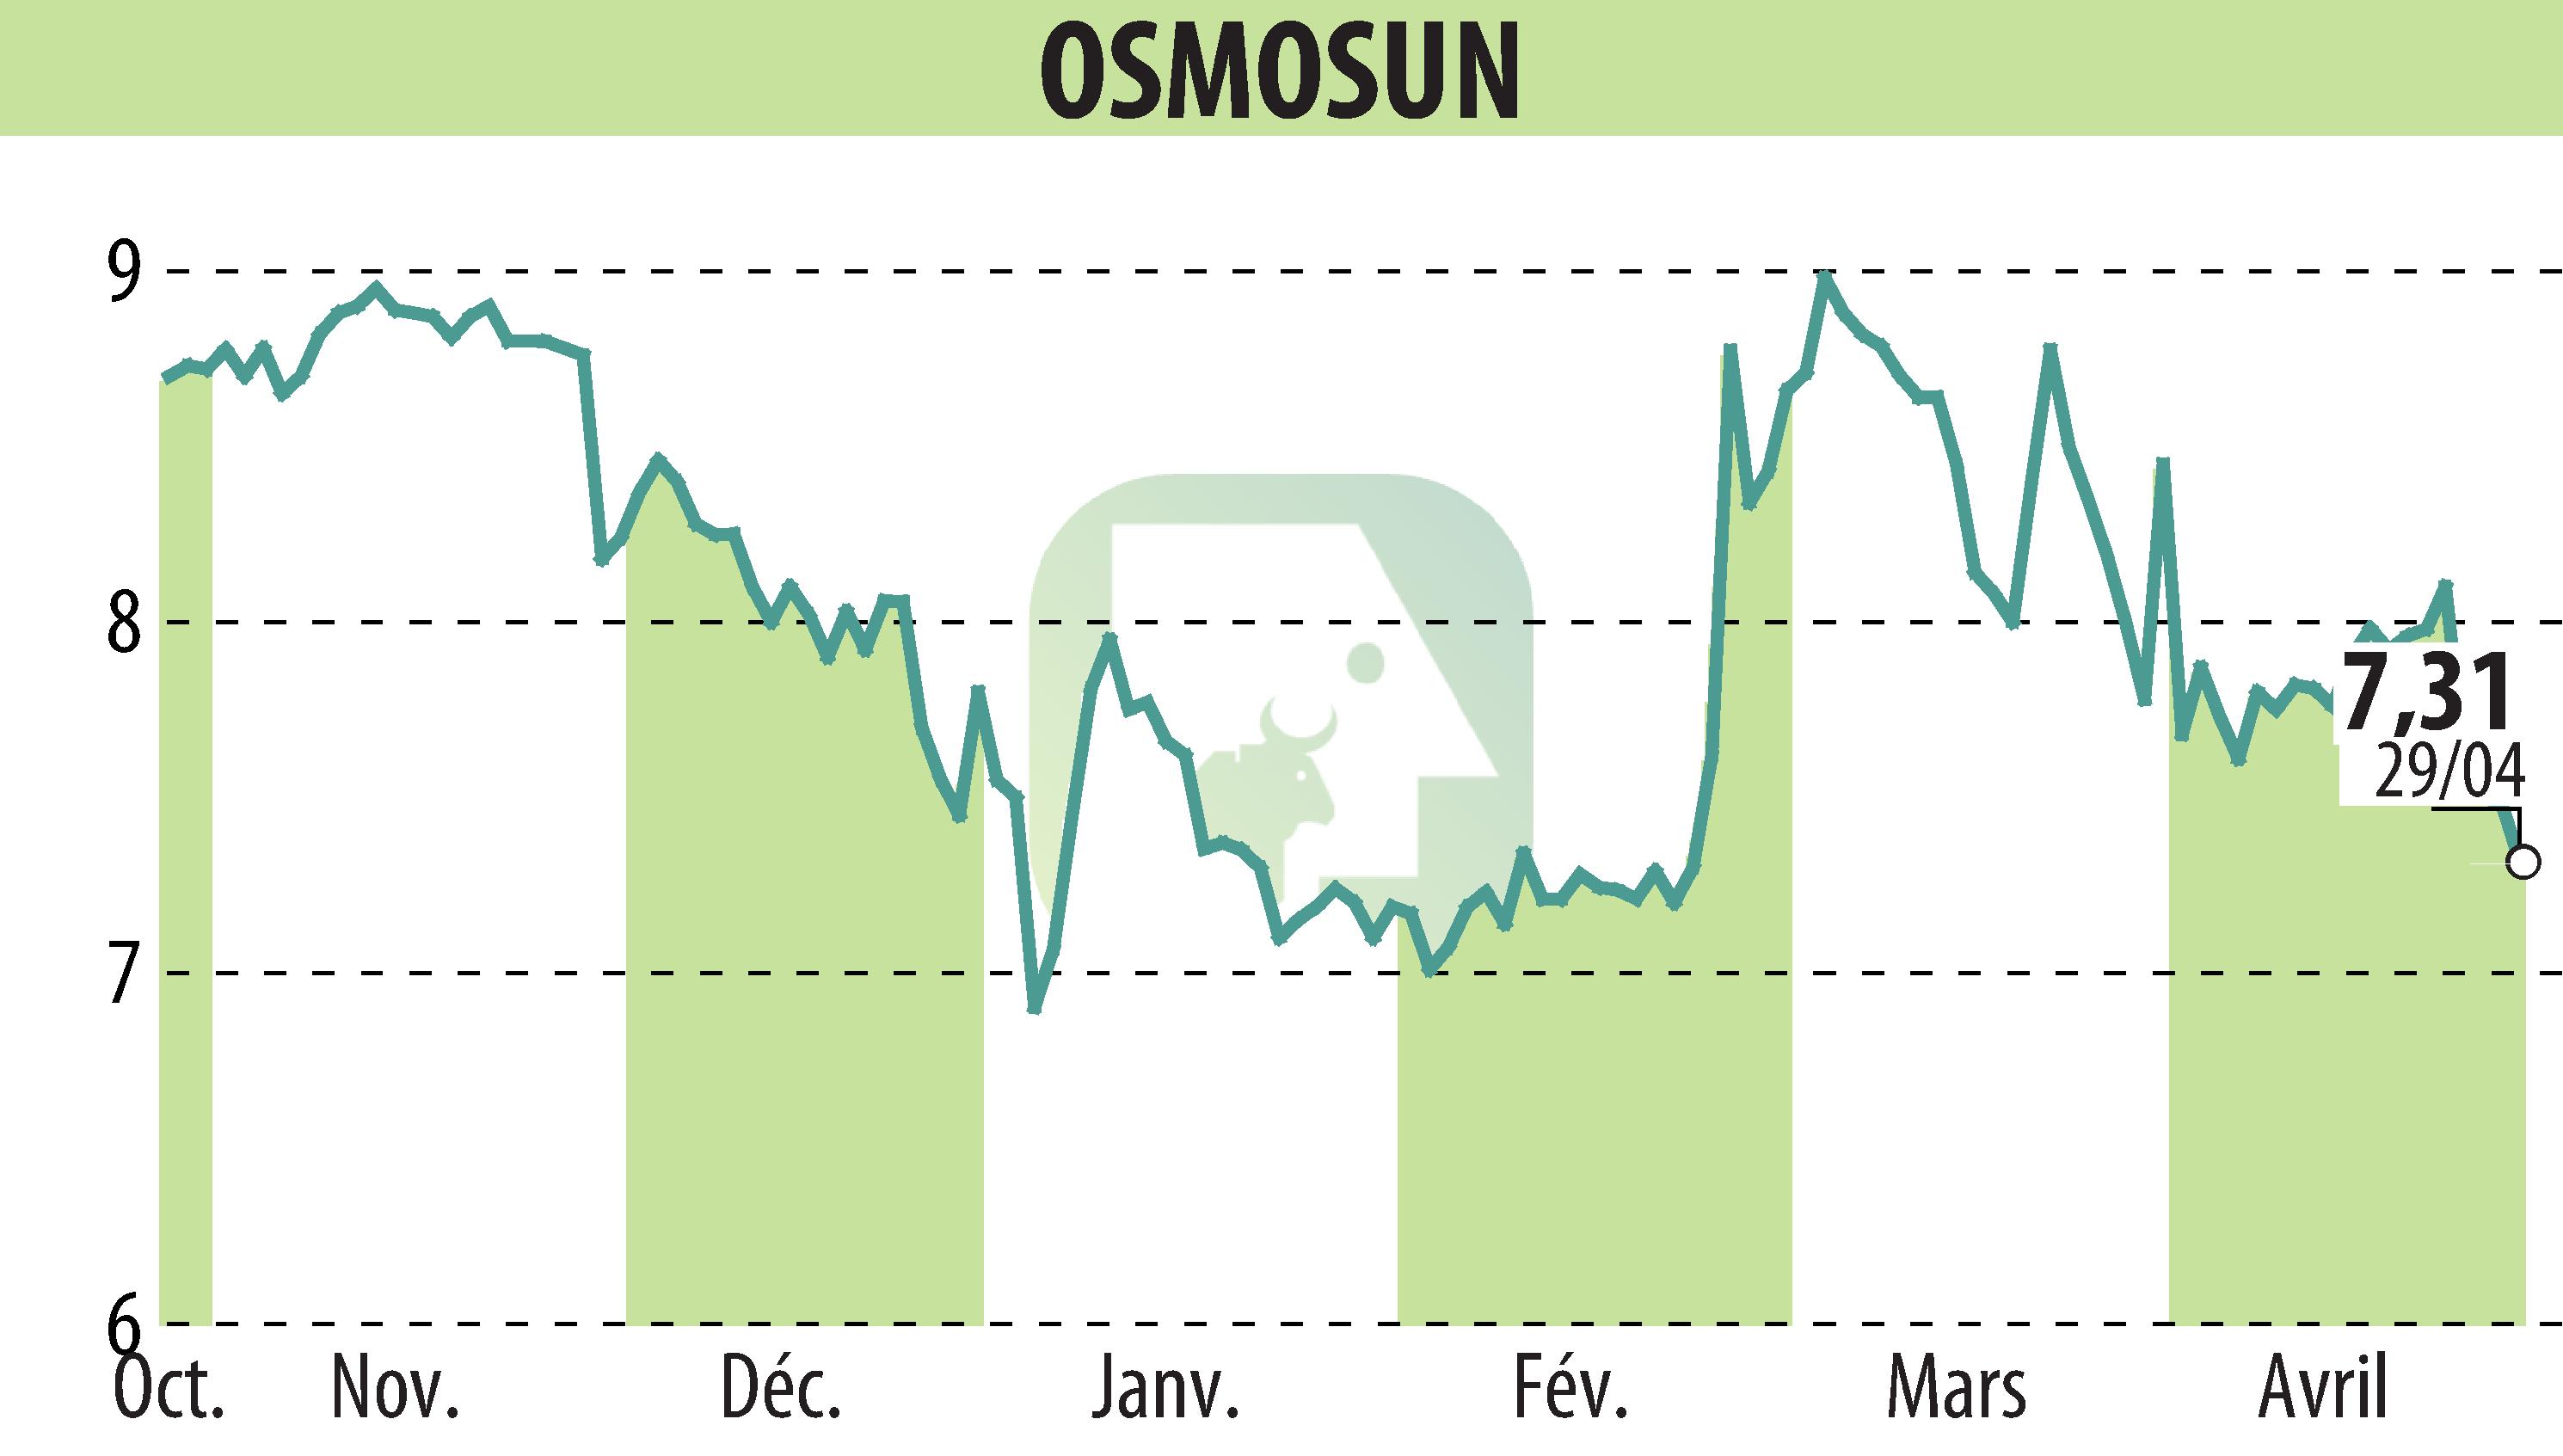 Stock price chart of OSMOSUN (EPA:ALWTR) showing fluctuations.